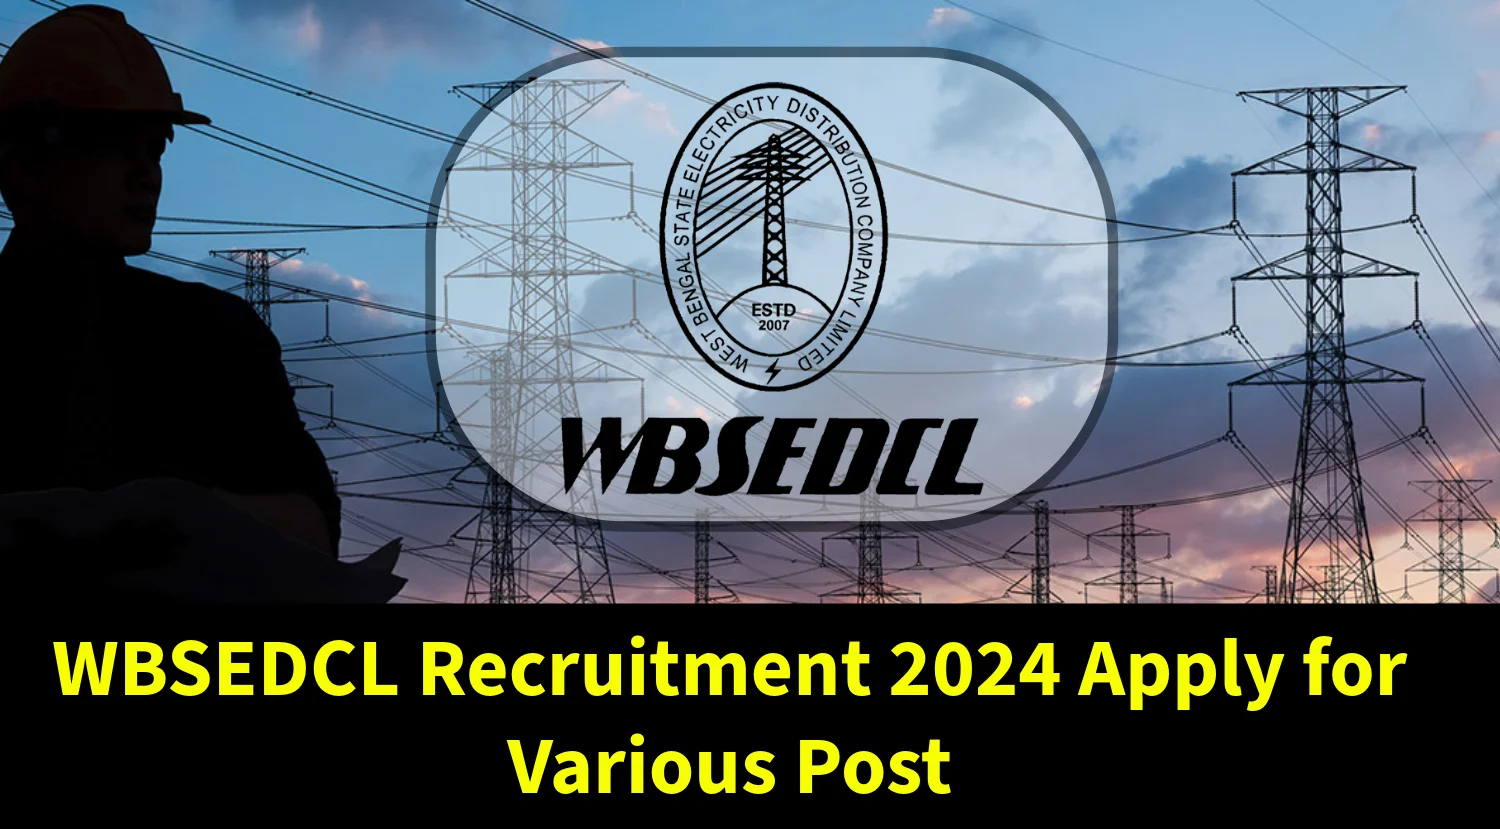 WBSEDCL Recruitment 2024 Apply for Various Post